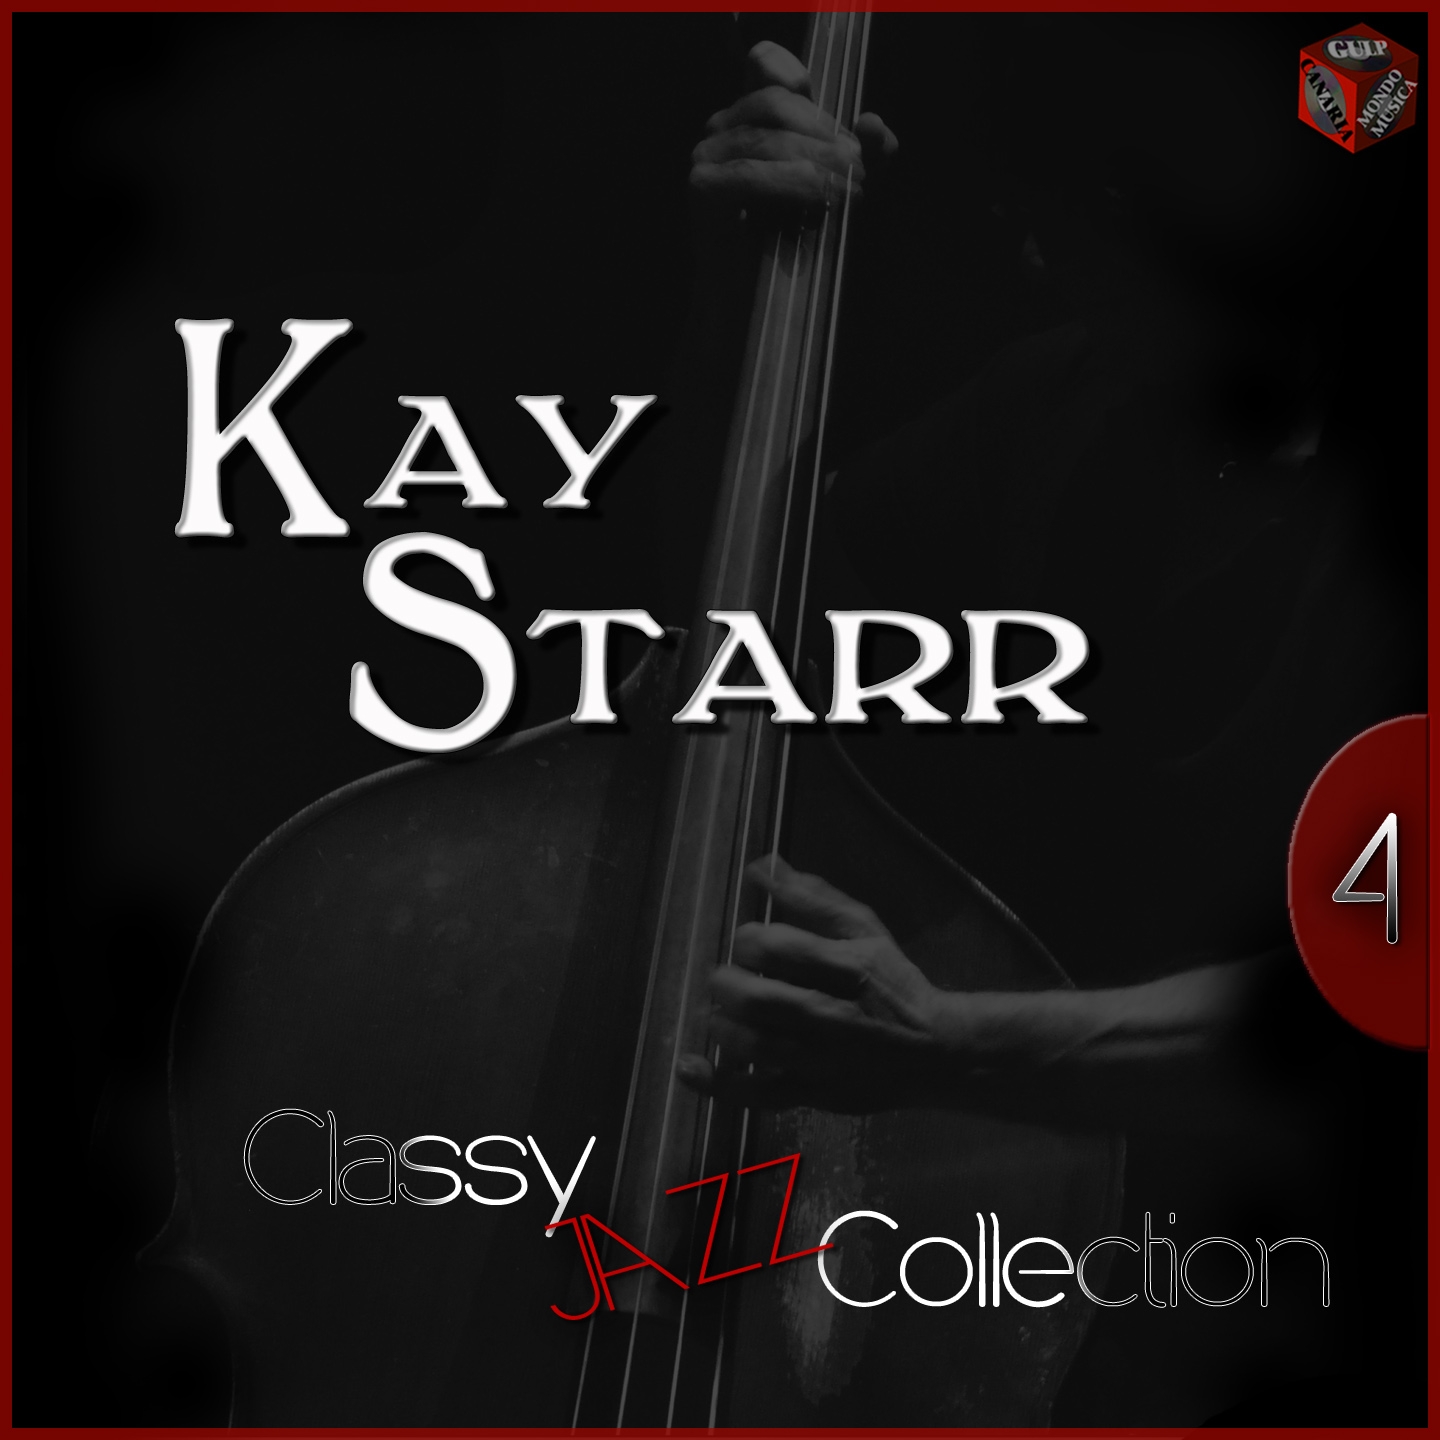 Classy Jazz Collection: Kay Starr, Vol. 4